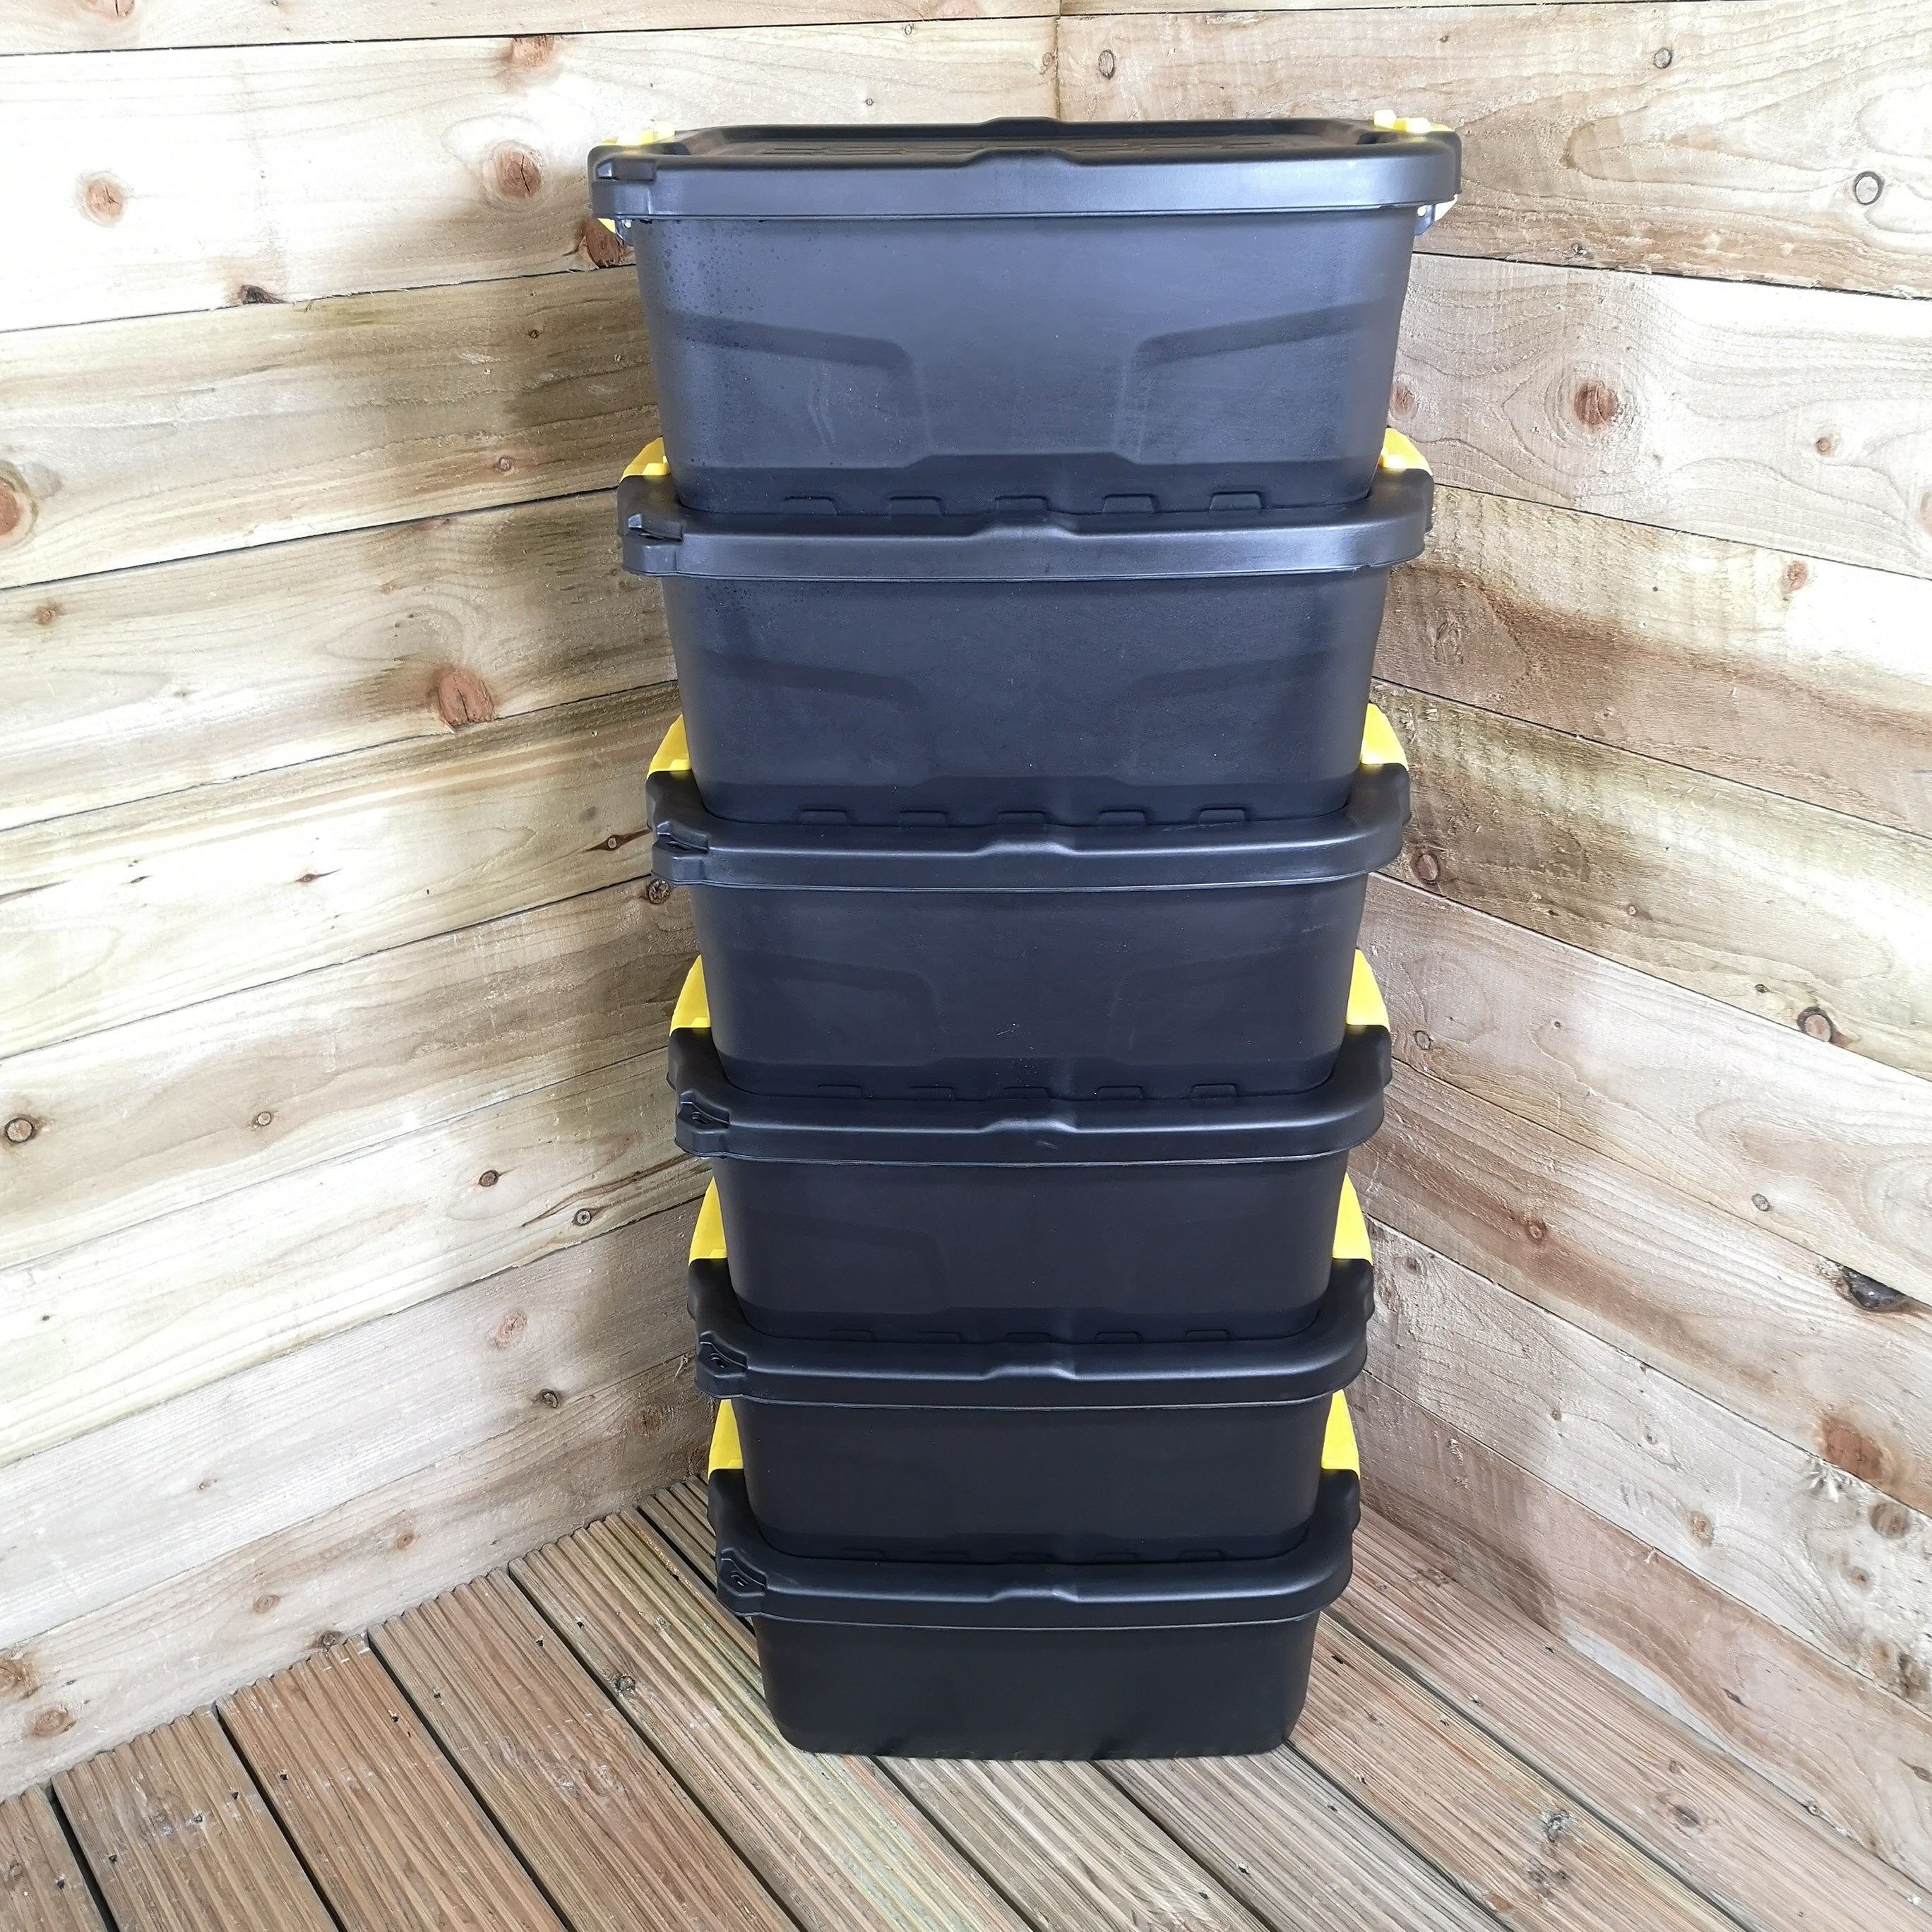 6 x 24L Heavy Duty Storage Boxes, Sturdy, Lockable, Stackable and Nestable Design Storage Chests with Clips in Black